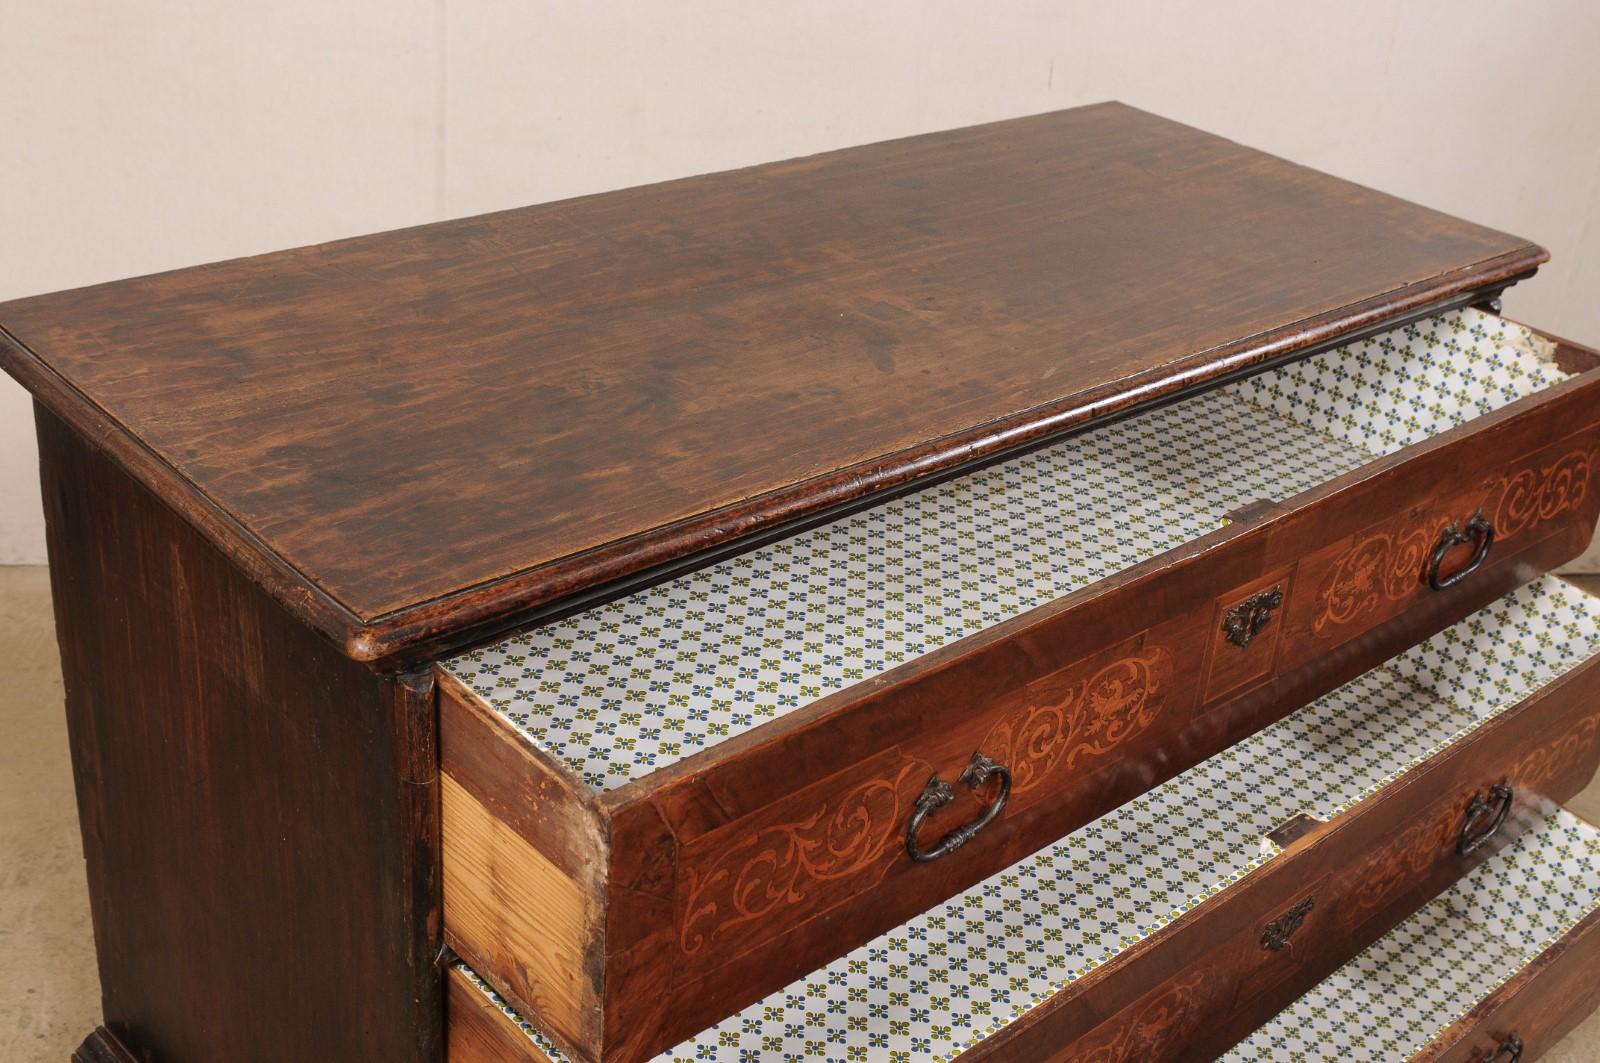 18th Century 18th C. Italian Chest w/Exquisite Inlay Designs and the Original Hardware For Sale